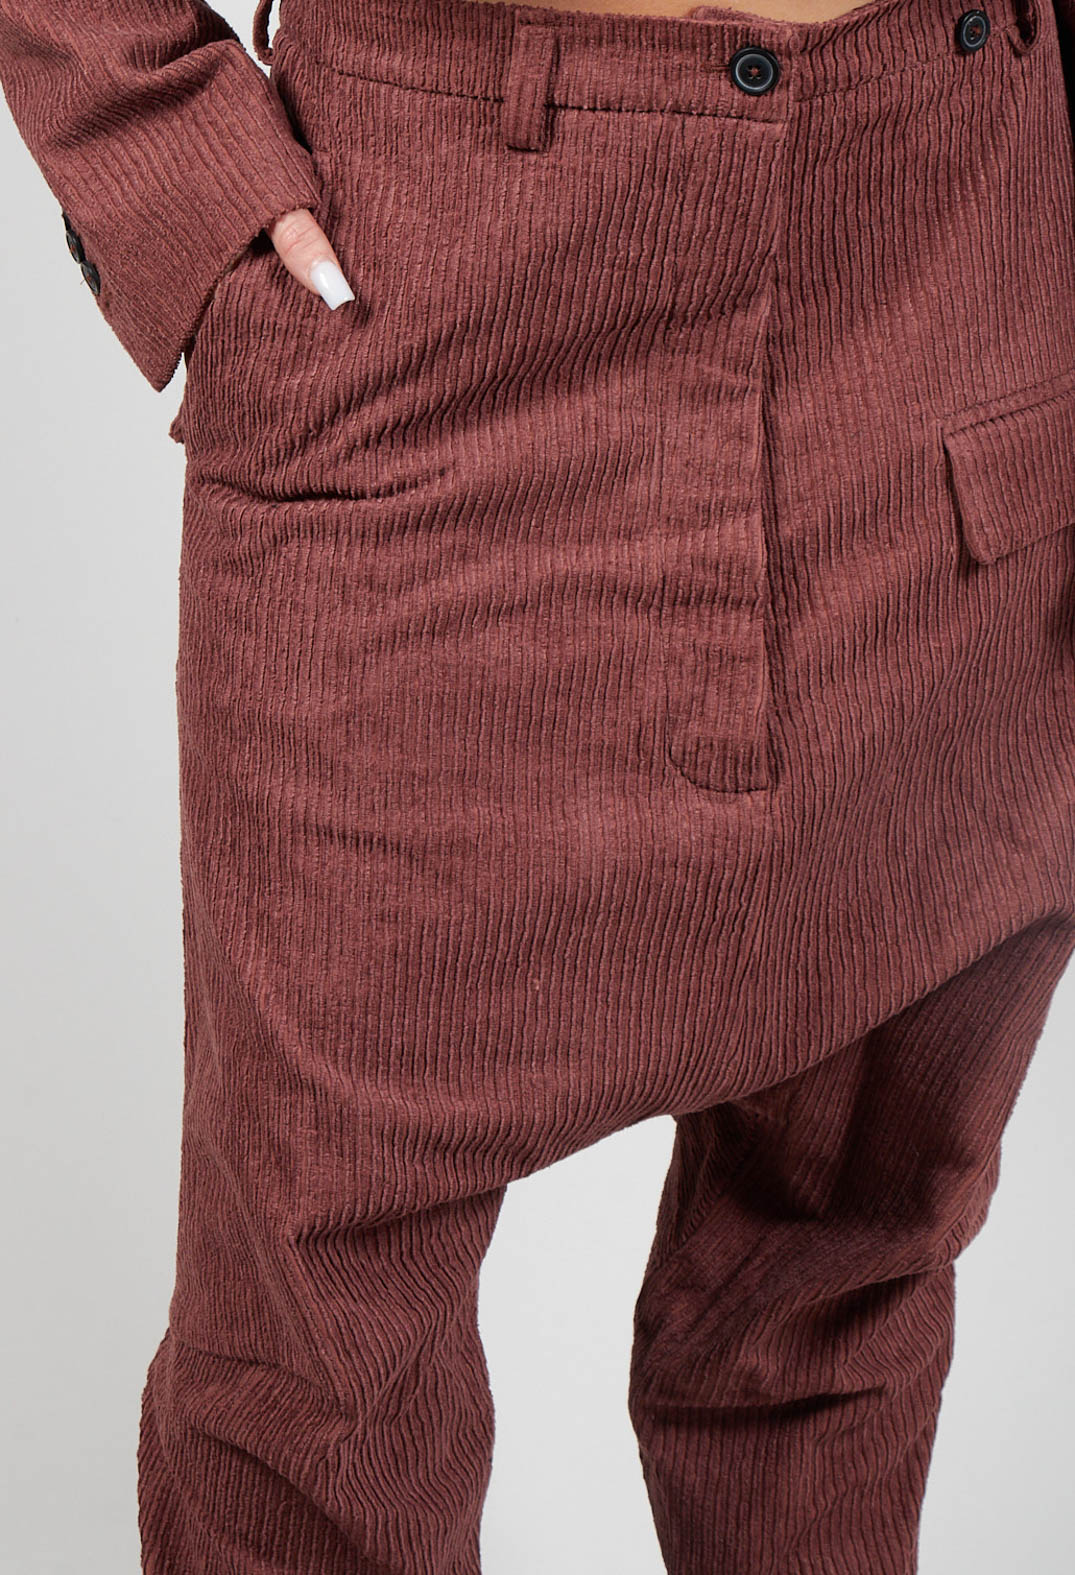 Trousers with Attachable Brace in Rust